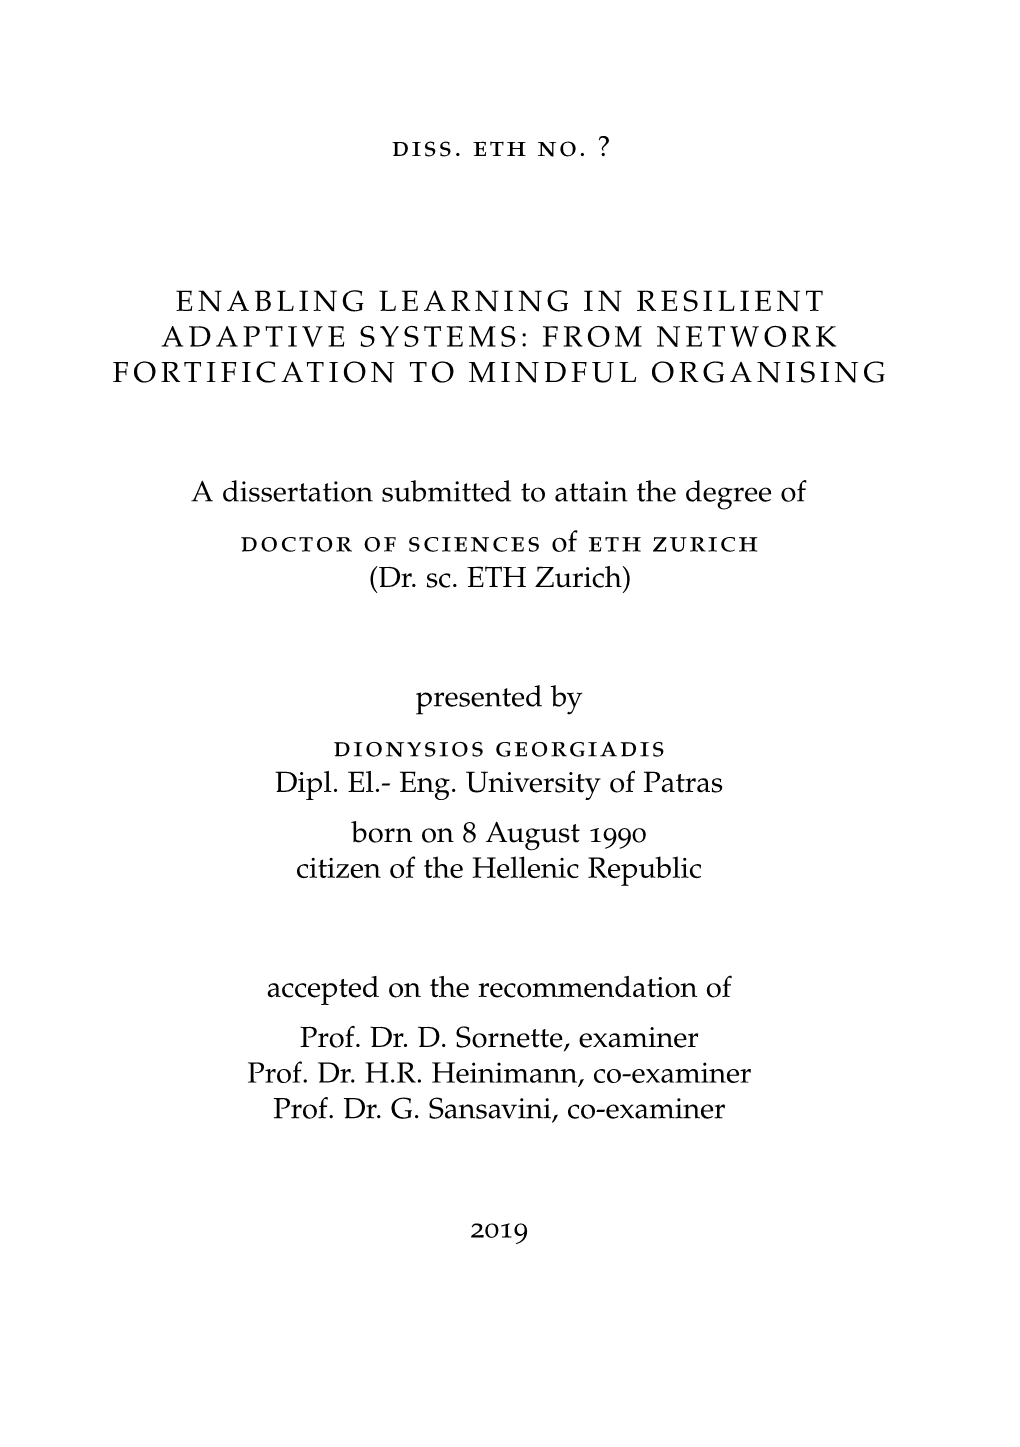 Enabling Learning in Resilient Adaptive Systems: from Network Fortiﬁcation to Mindful Organising, 2019 ABSTRACT